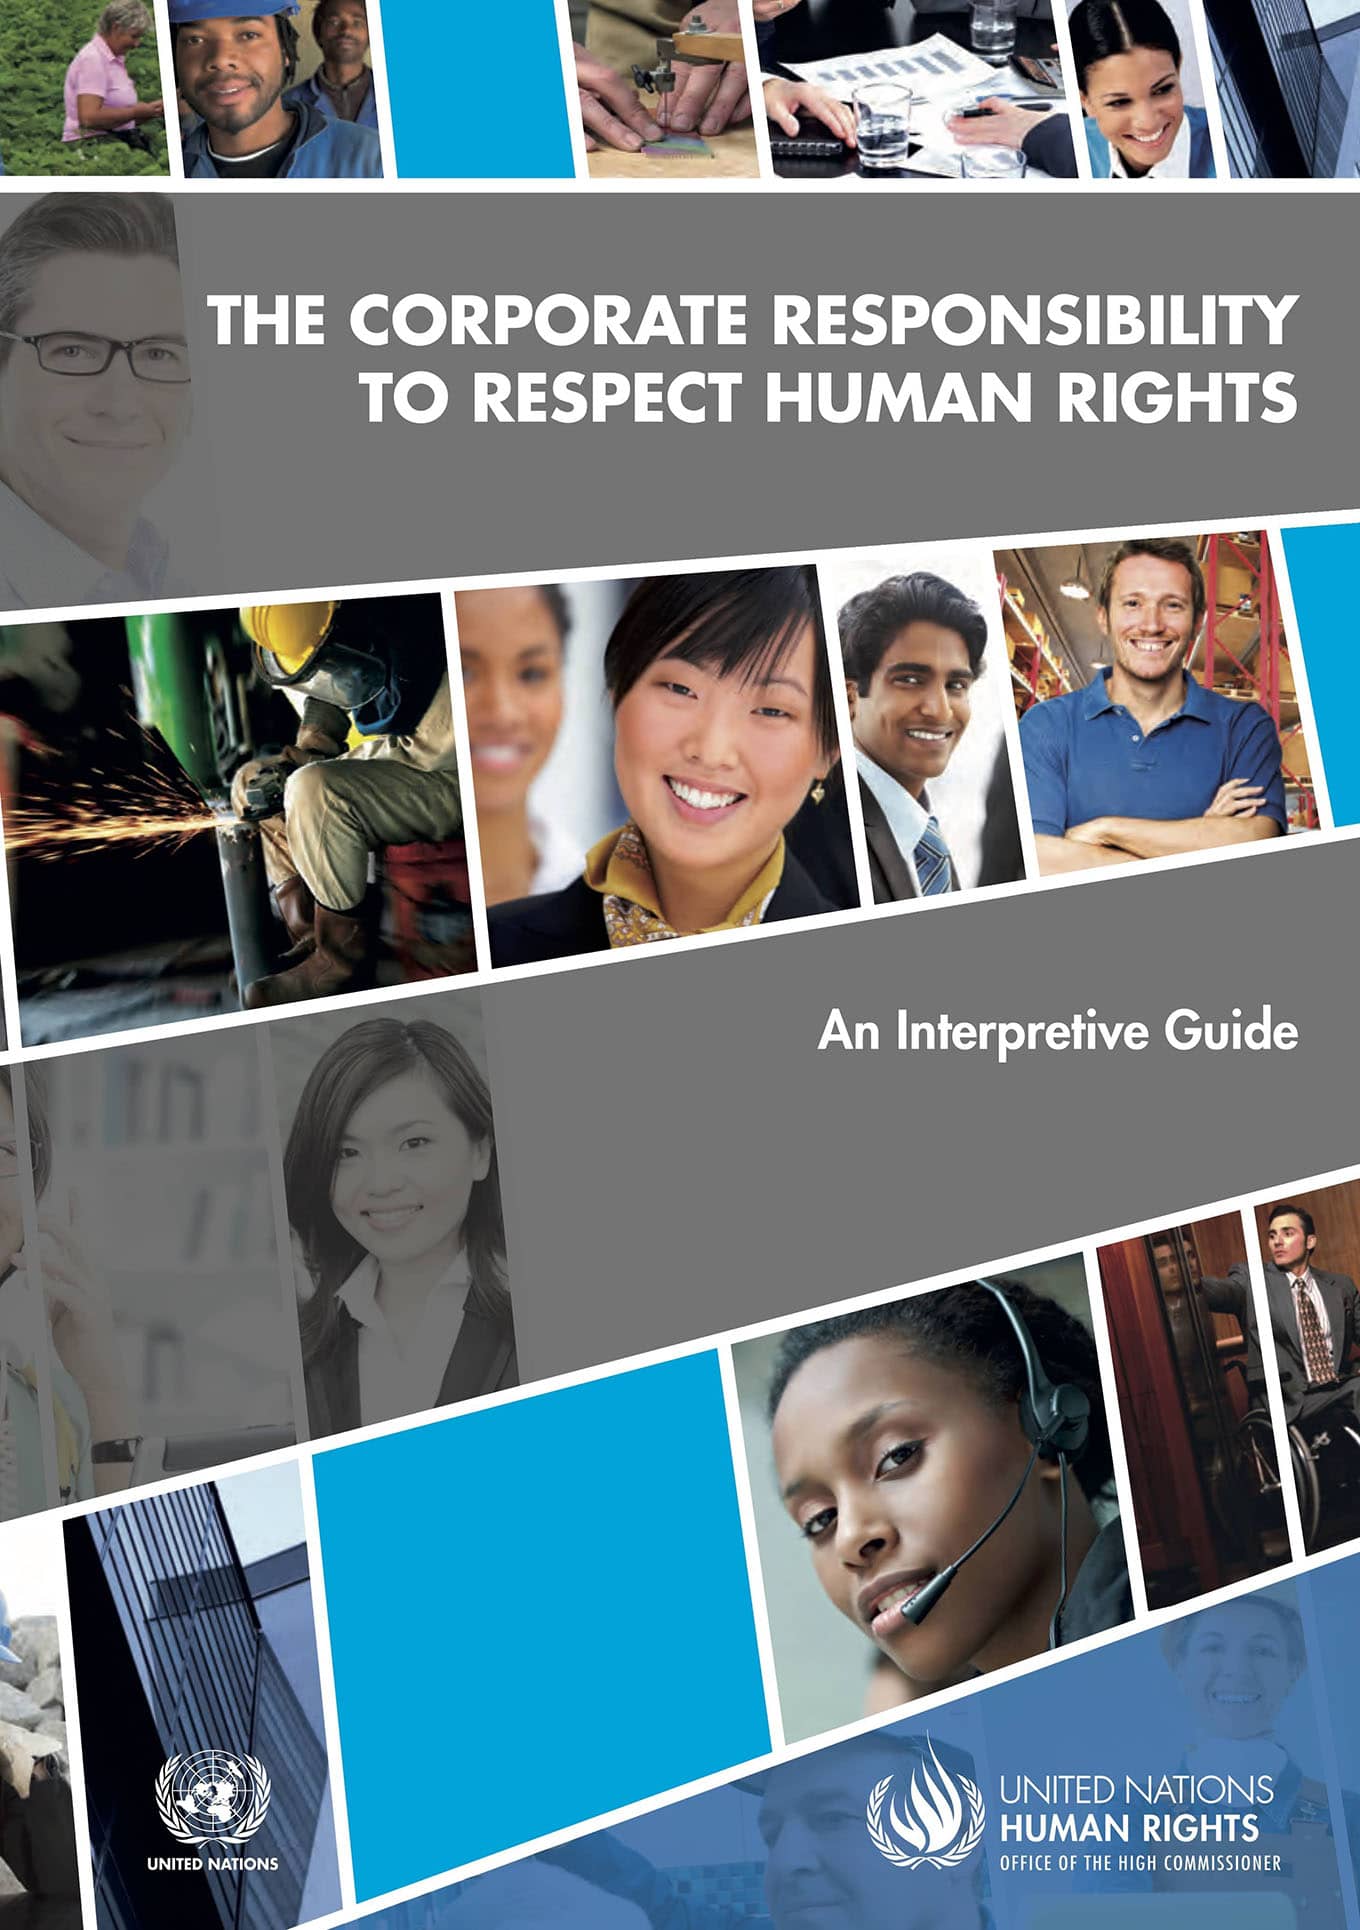 The Corporate Responsibility to Respect Human Rights: An Interpretive Guide (United Nations Human Rights, 2012)